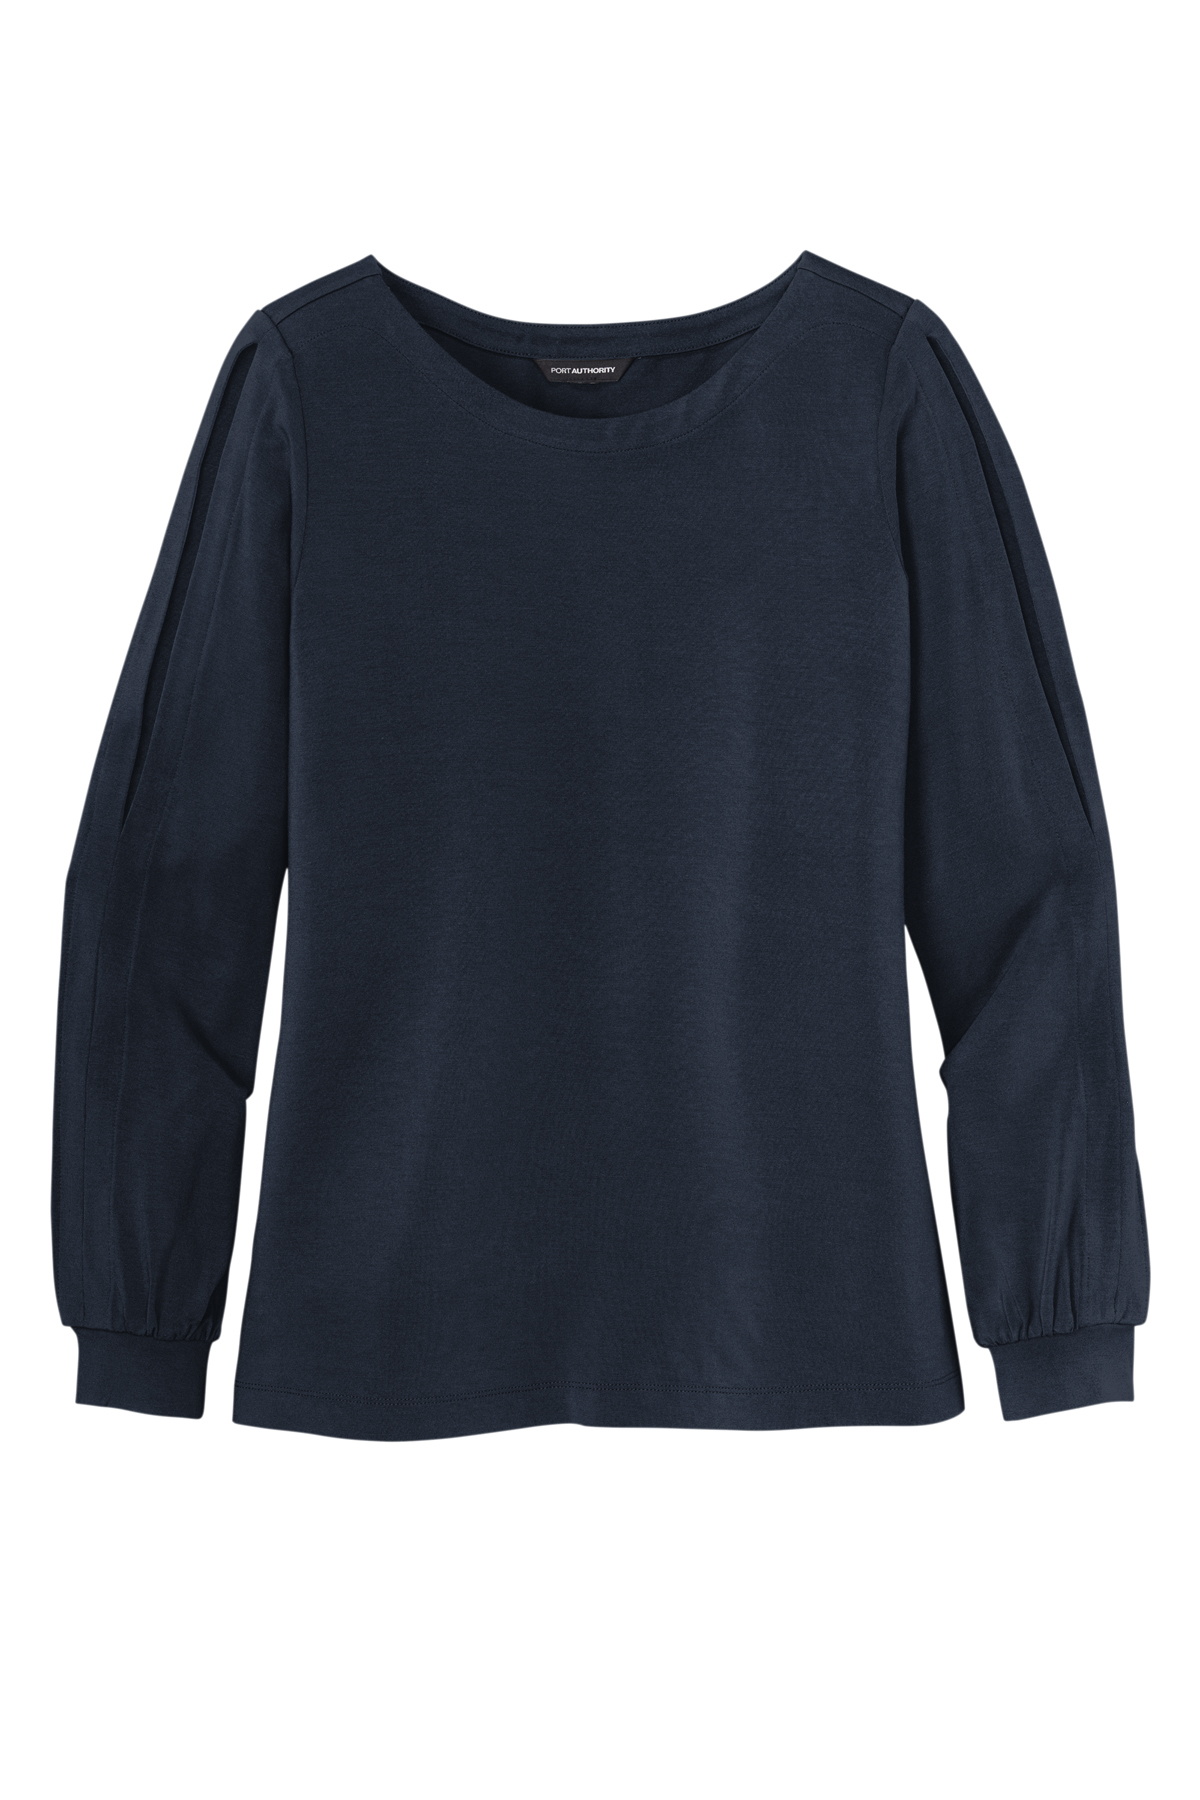 Port Authority Ladies Luxe Knit Jewel Neck Top, Product